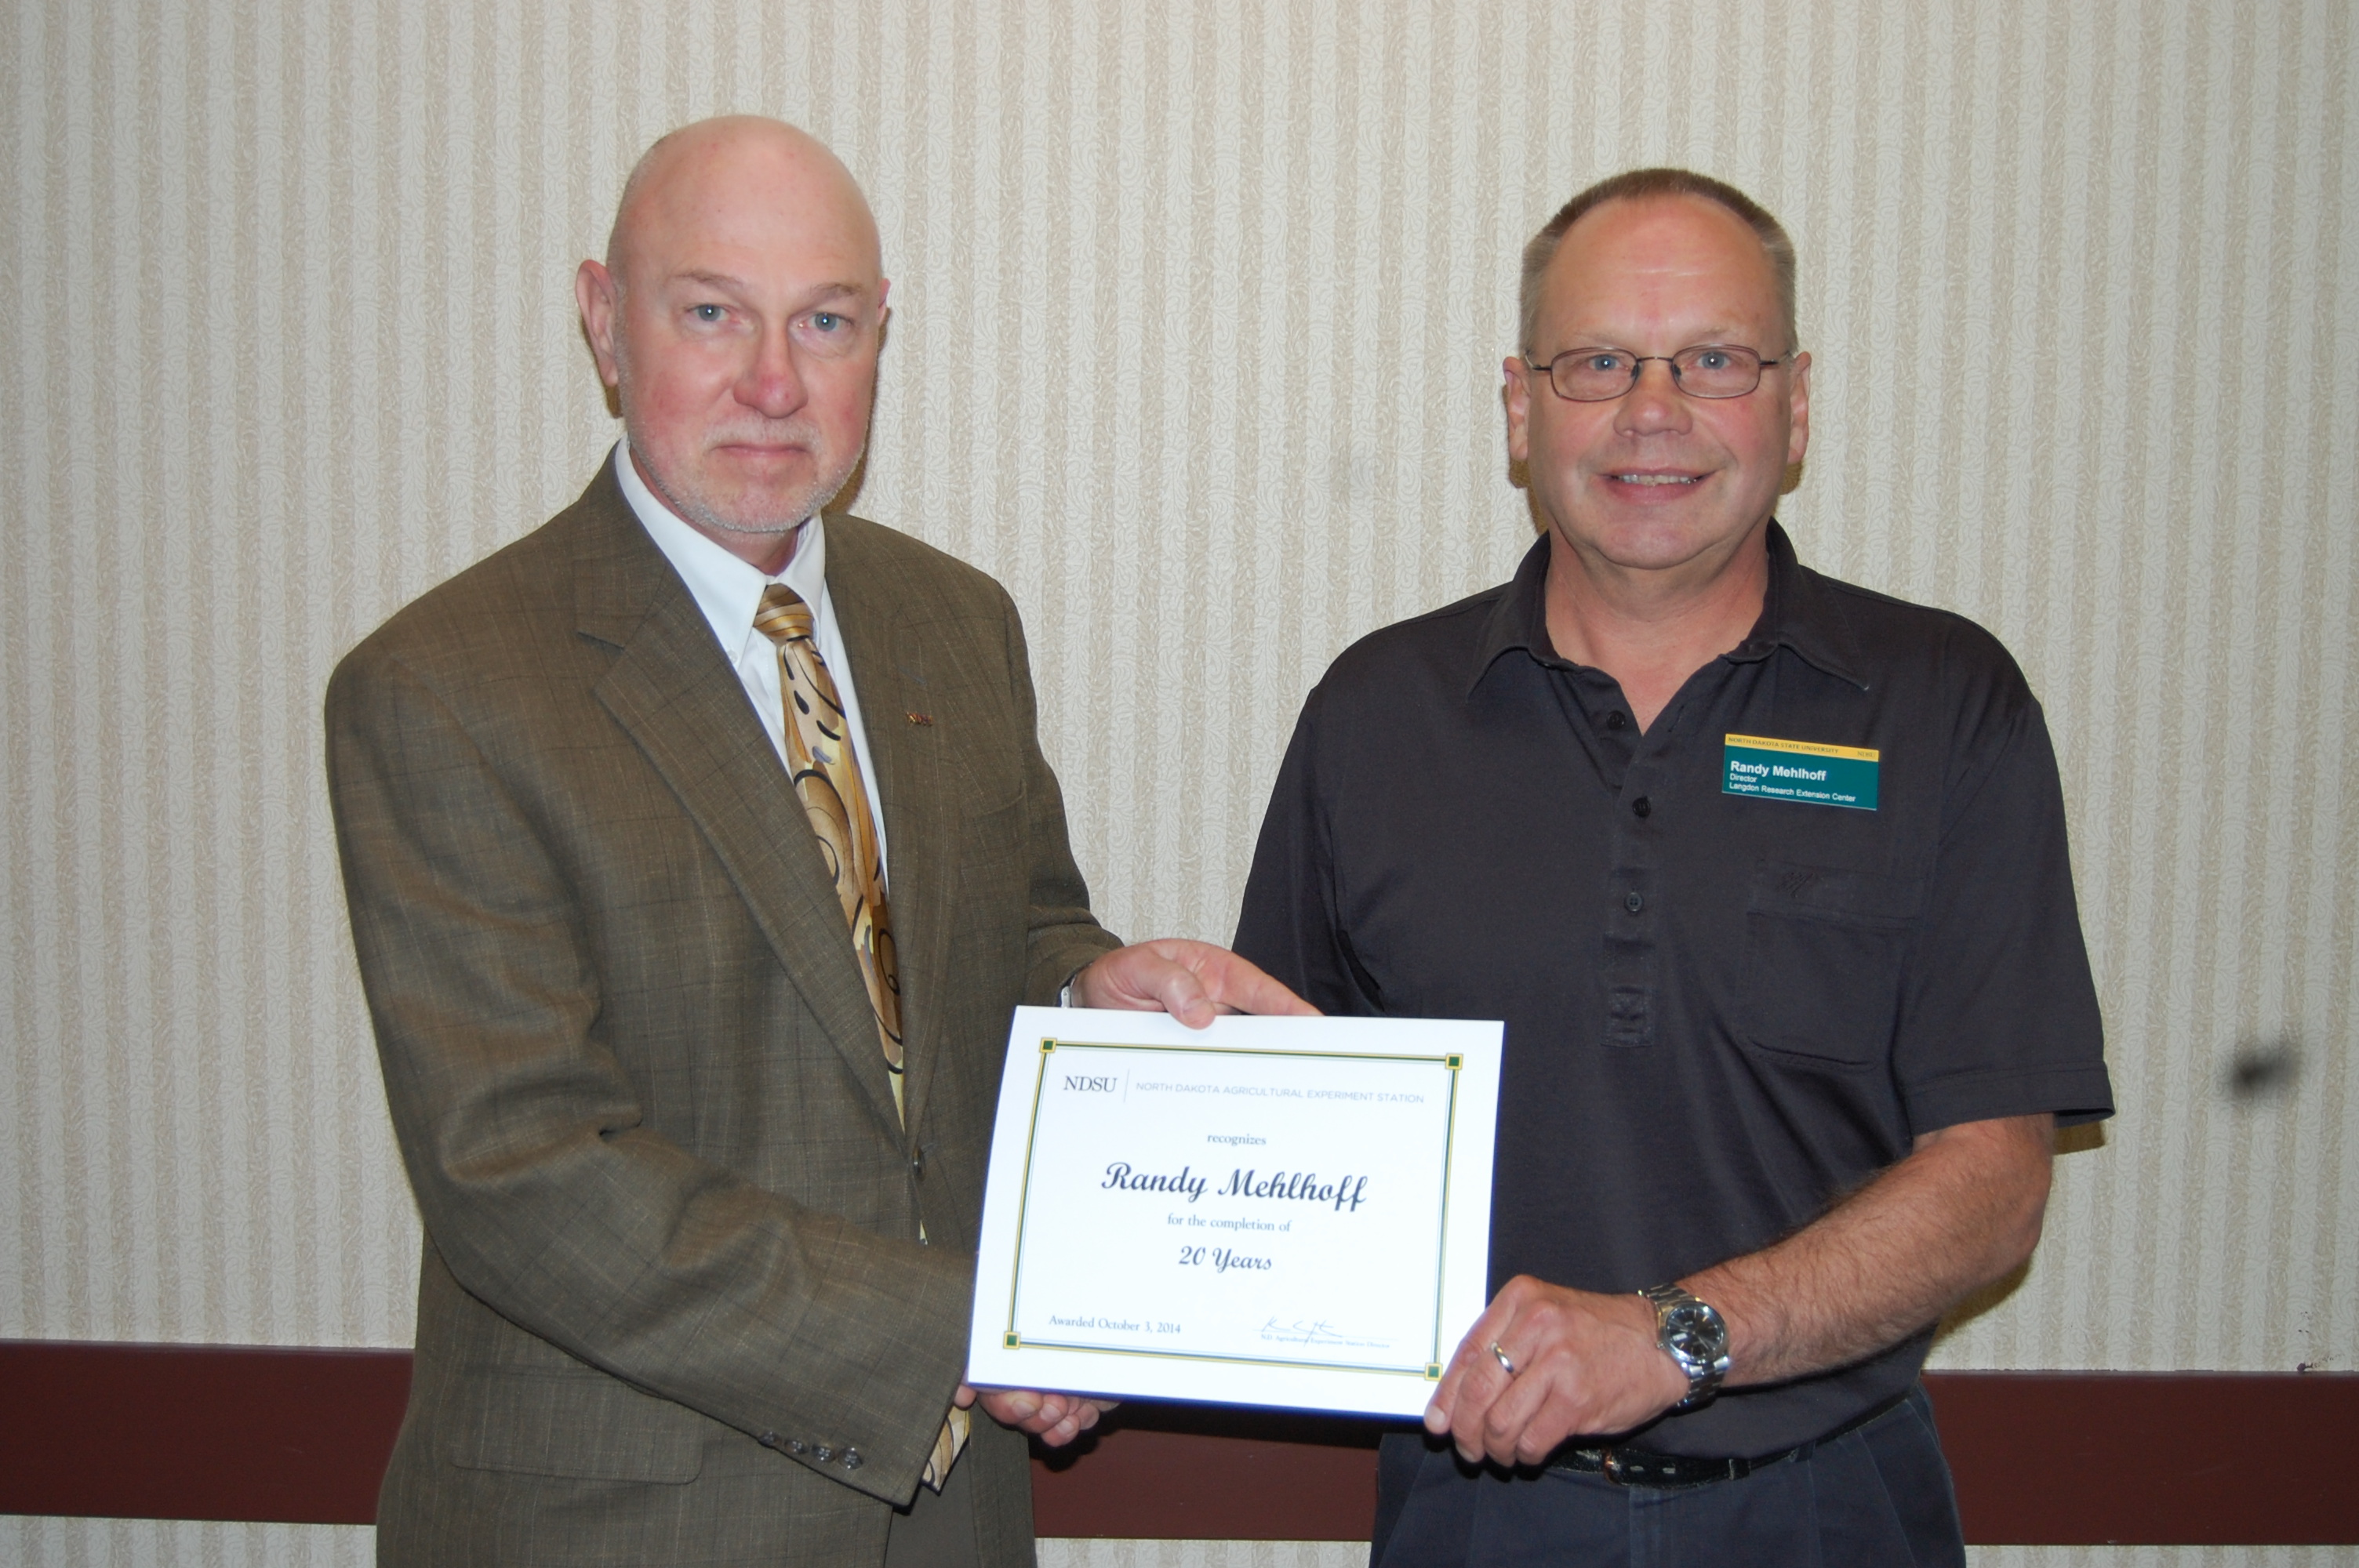 Ken Grafton, vice president for Agricultural Affairs, director of the North Dakota Agricultural Experiment Station and dean of the College of Agriculture, Food Systems, and Natural Resources (left), presents the award to Randy Mehlhoff.